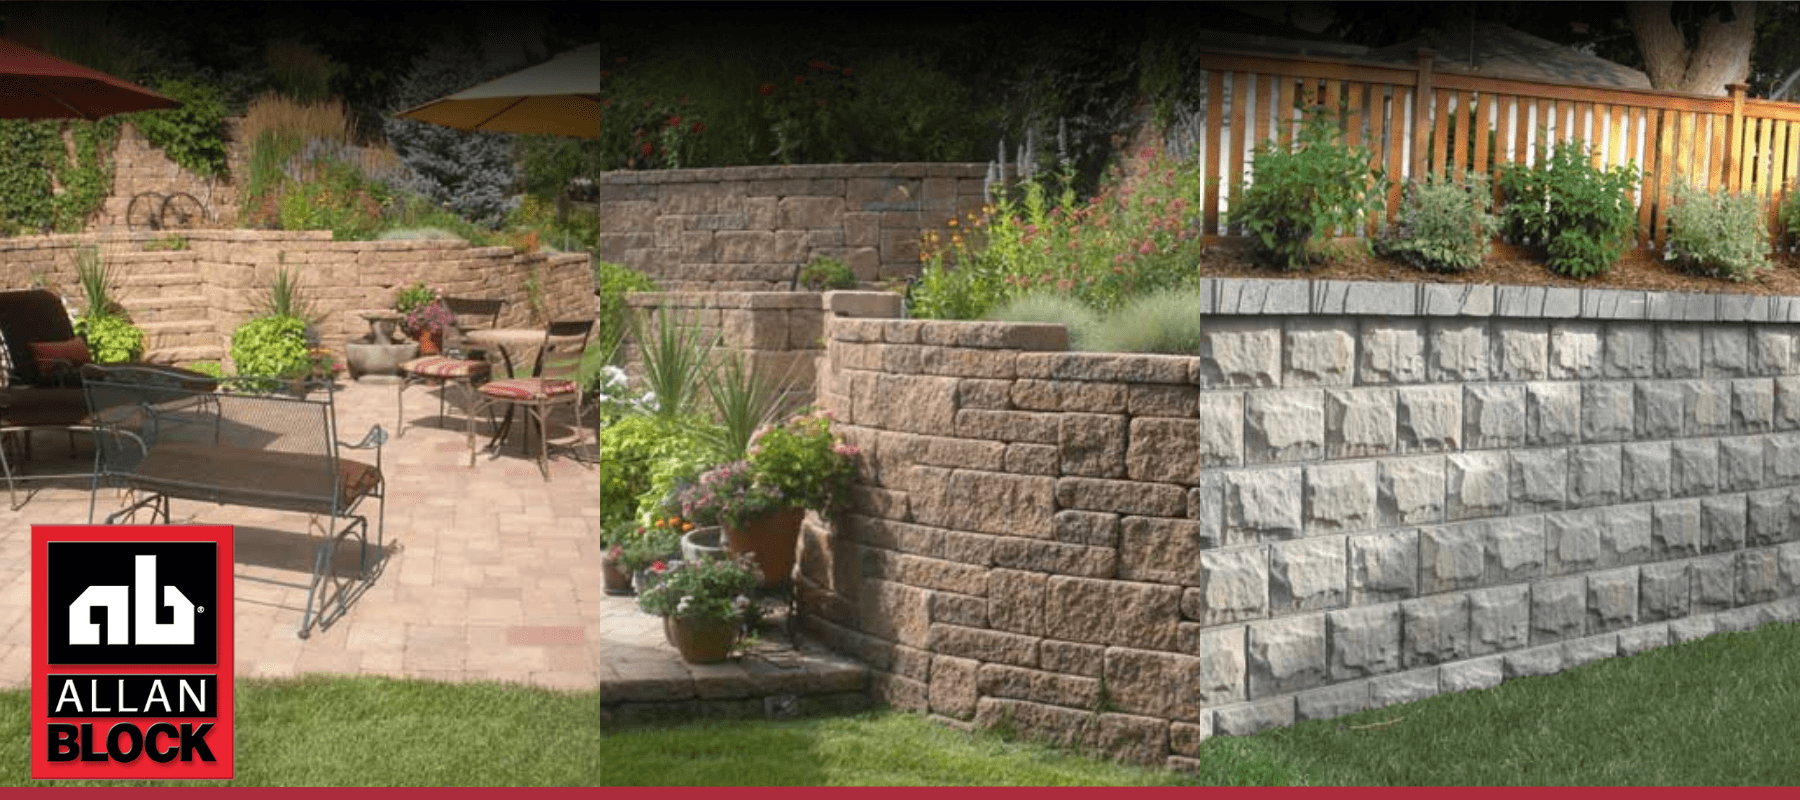 Shop Allan Block Hardscape Products at Gilford Home Center